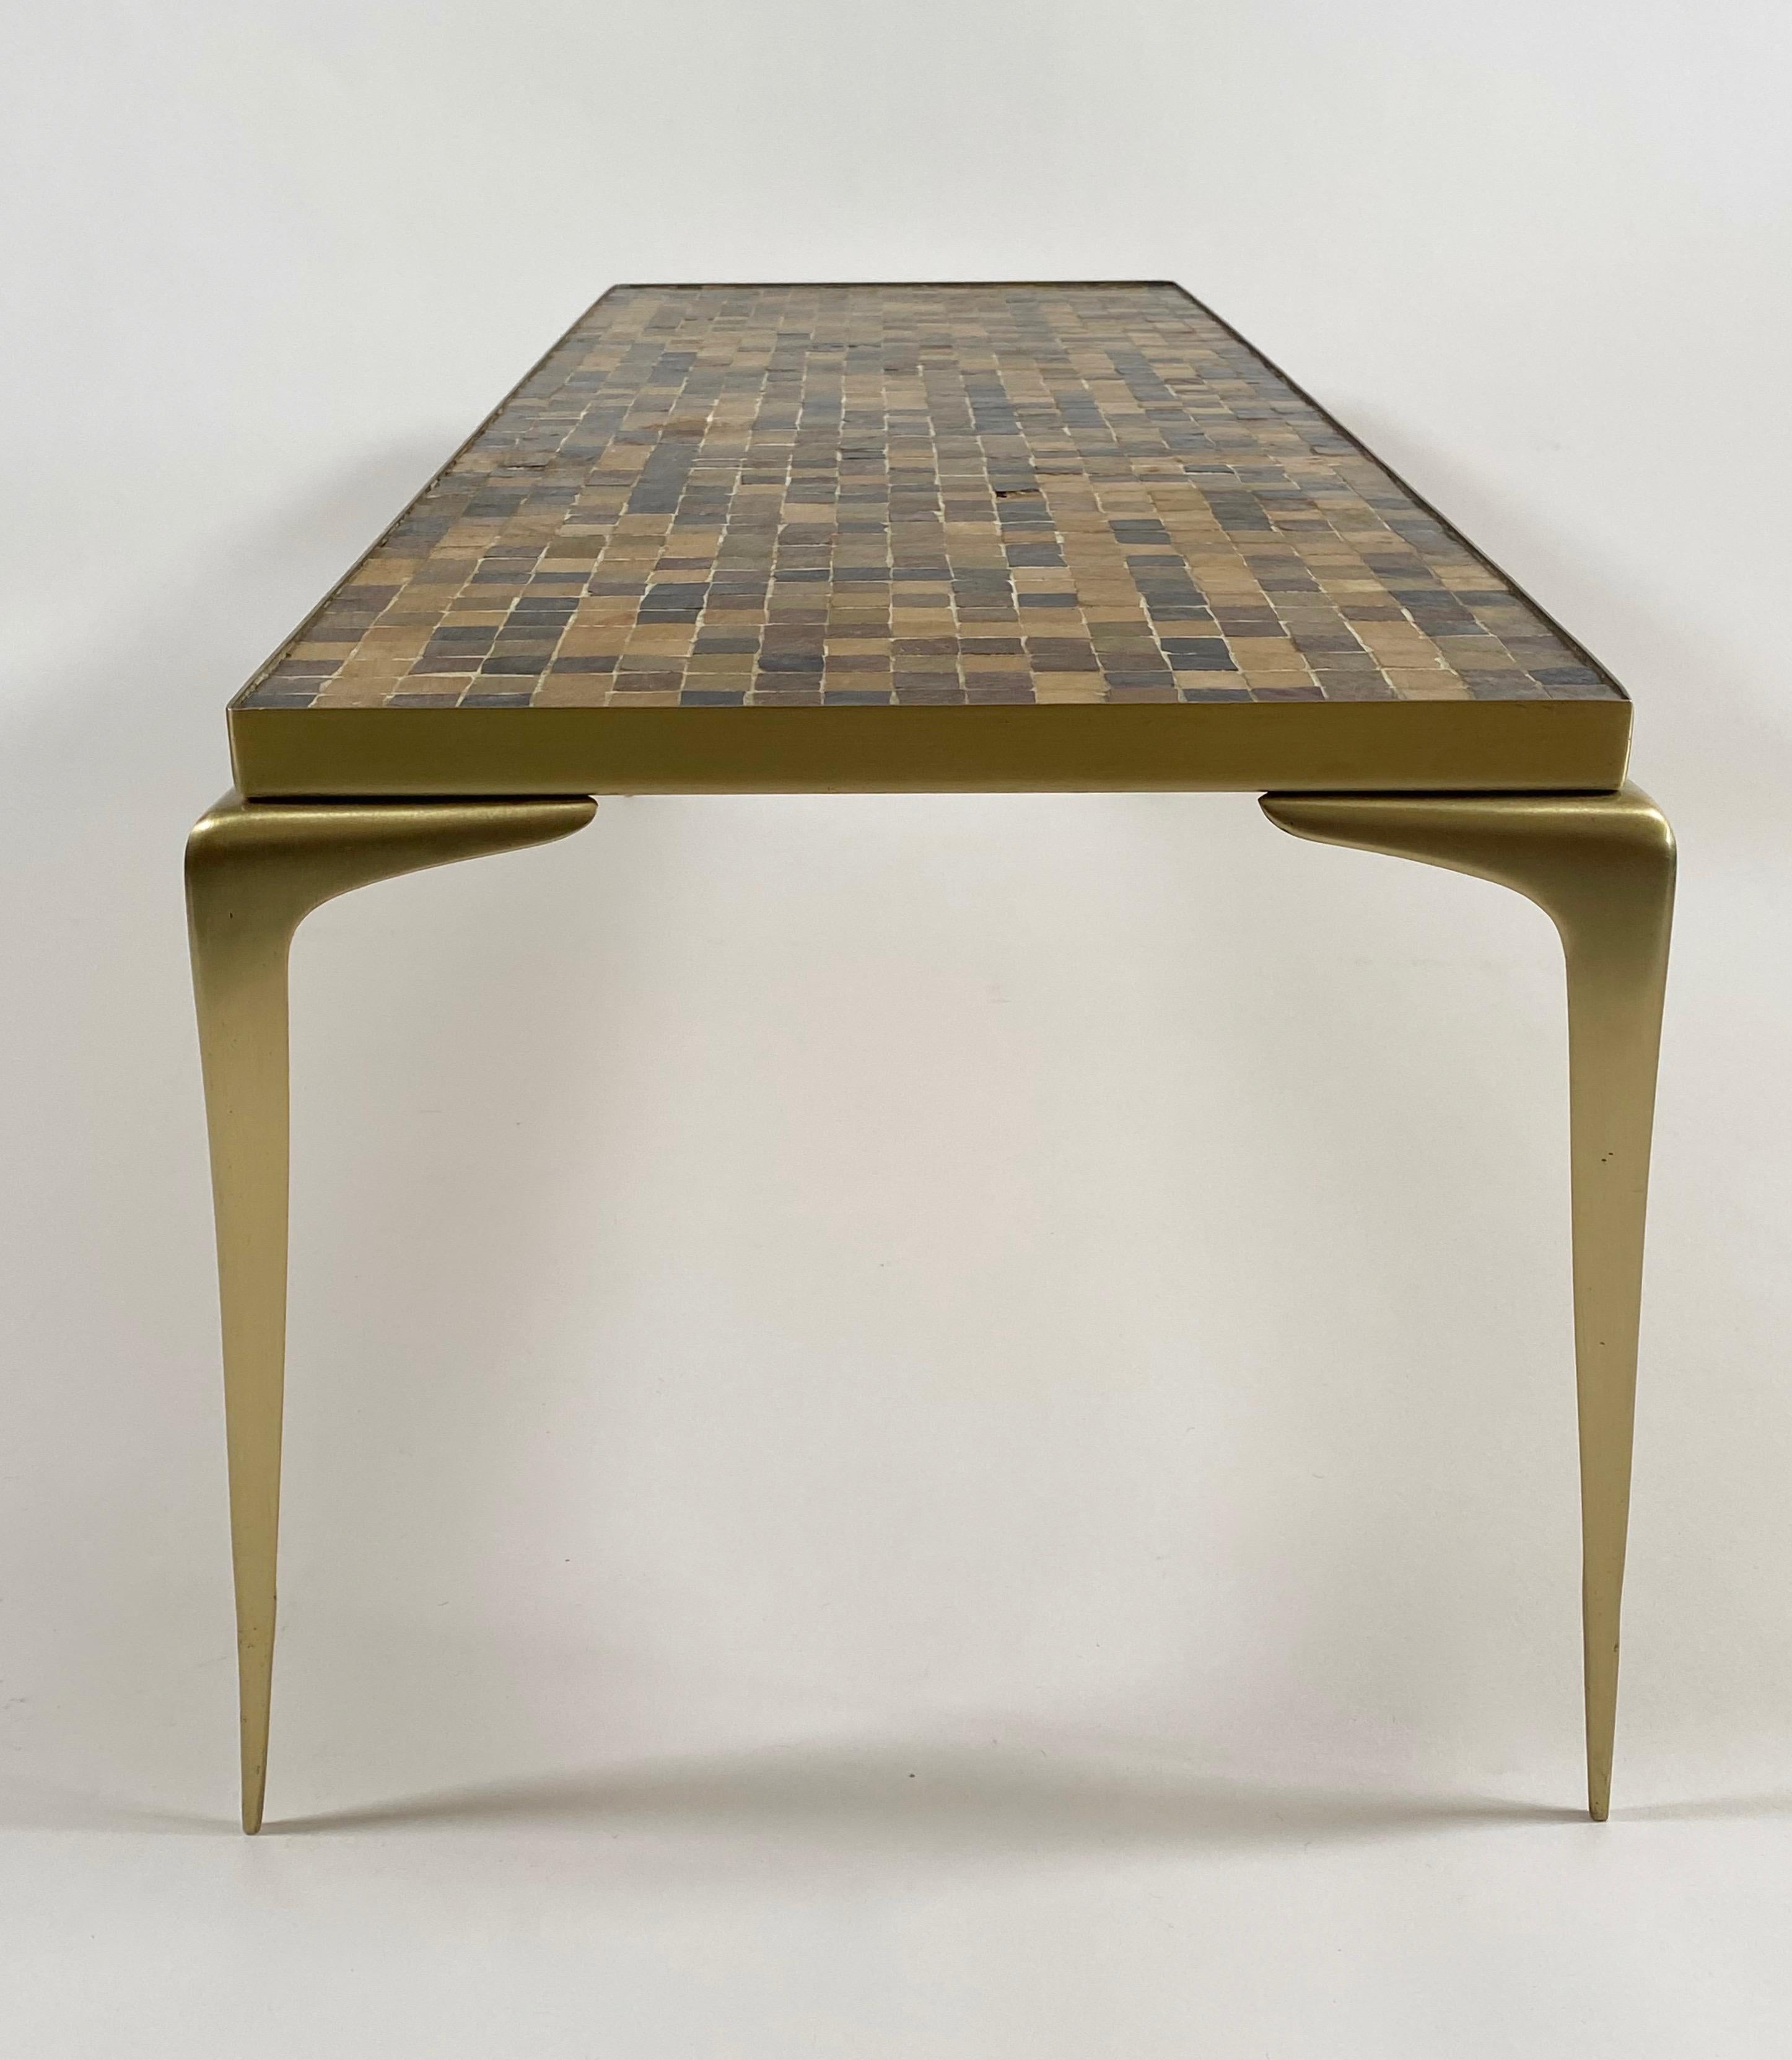 1960s Japanese Coffee Table in Brass with Square Glass Tiles 1